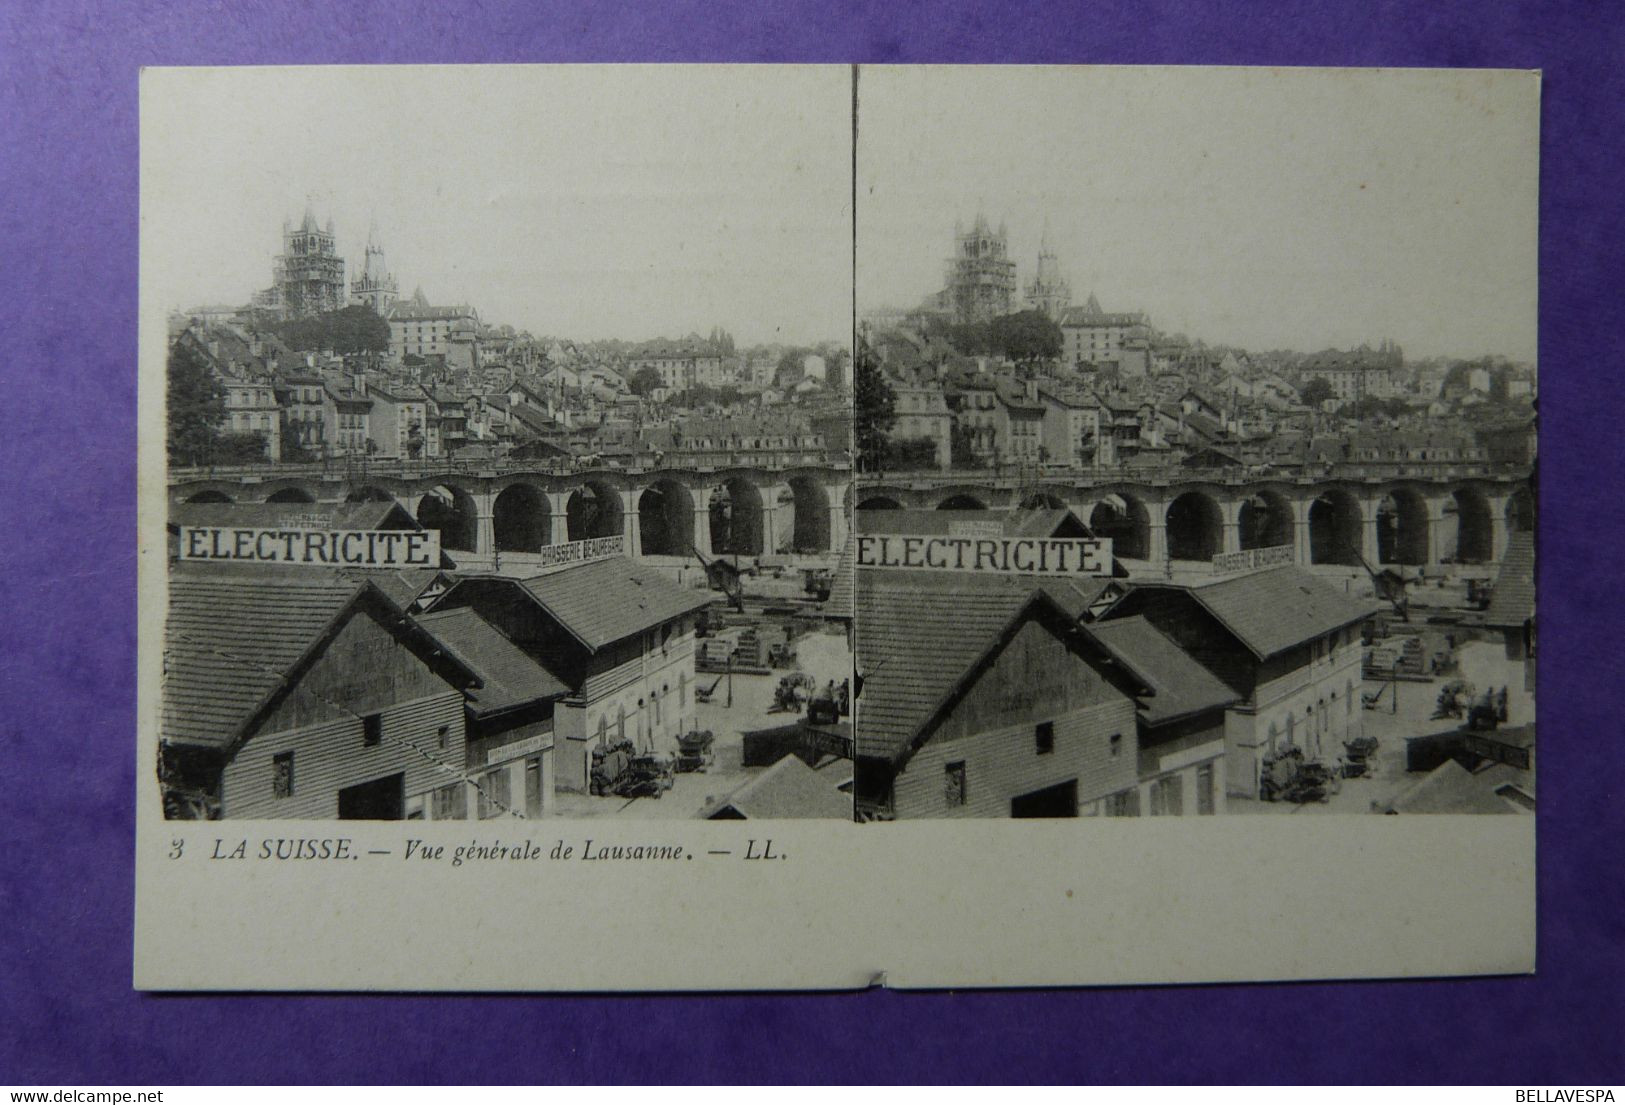 La Suisse Stereo View Lausanne. Moteurs A Gas  Petrol Electricite & Brasserie Beauregarde  Carte Stereoscope Stereo - Stereoscope Cards